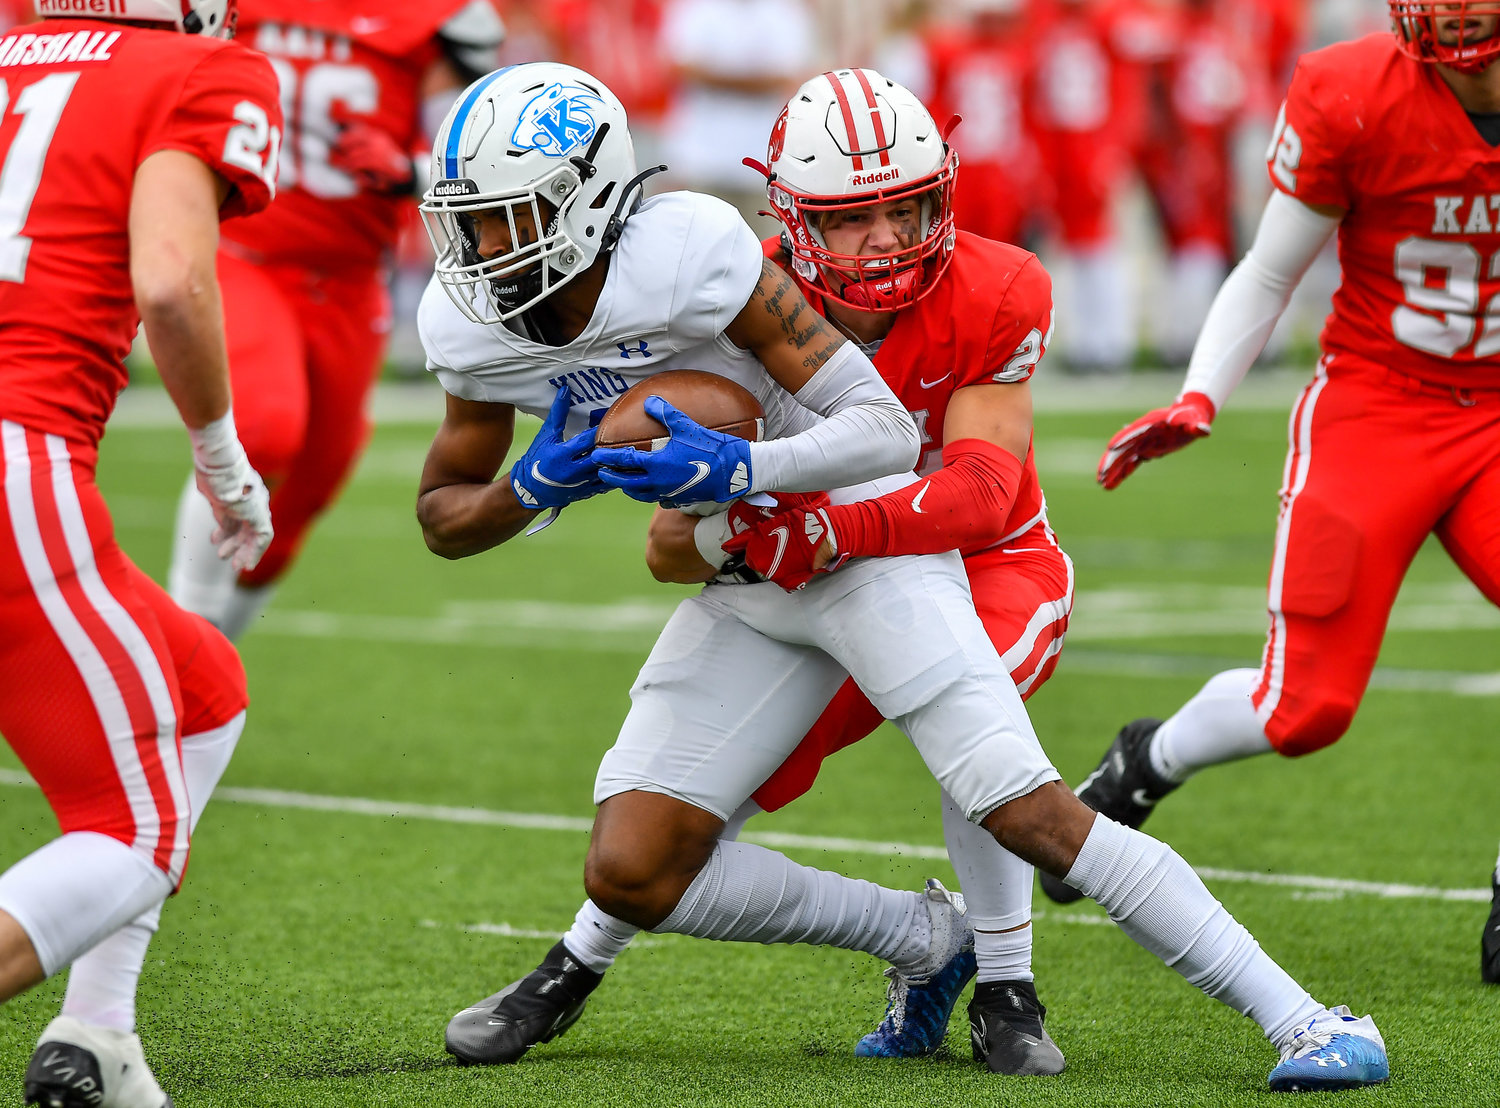 Katy Tx. Nov 26, 2021: Katy's #24 Hamilton McMartin makes the stop on King Panthers Malachi Boles #2 during the UIL regional playoff game between Katy Tigers and King Panthers at Legacy Stadium in Katy. (Photo by Mark Goodman / Katy Times)